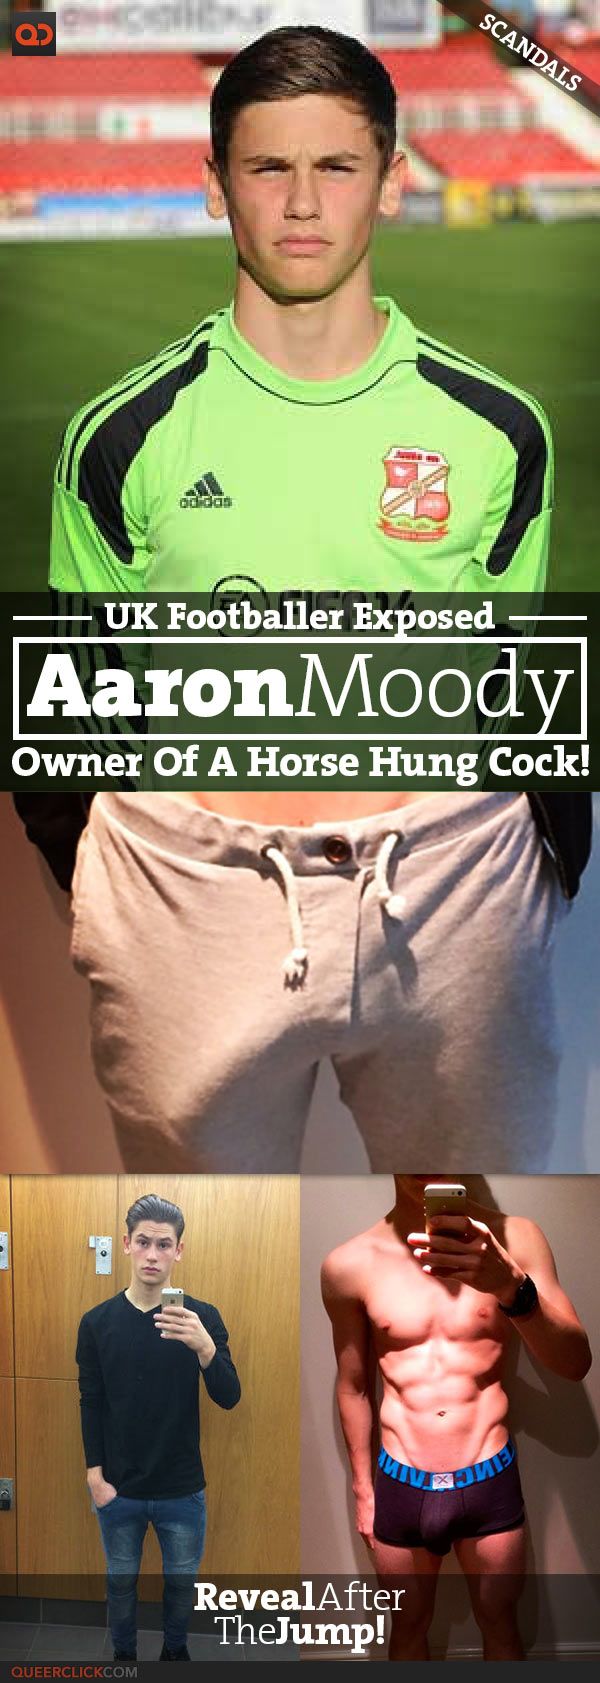 qc scandals uk footballer aaron moody unmasked as the owner of a horse hung cock